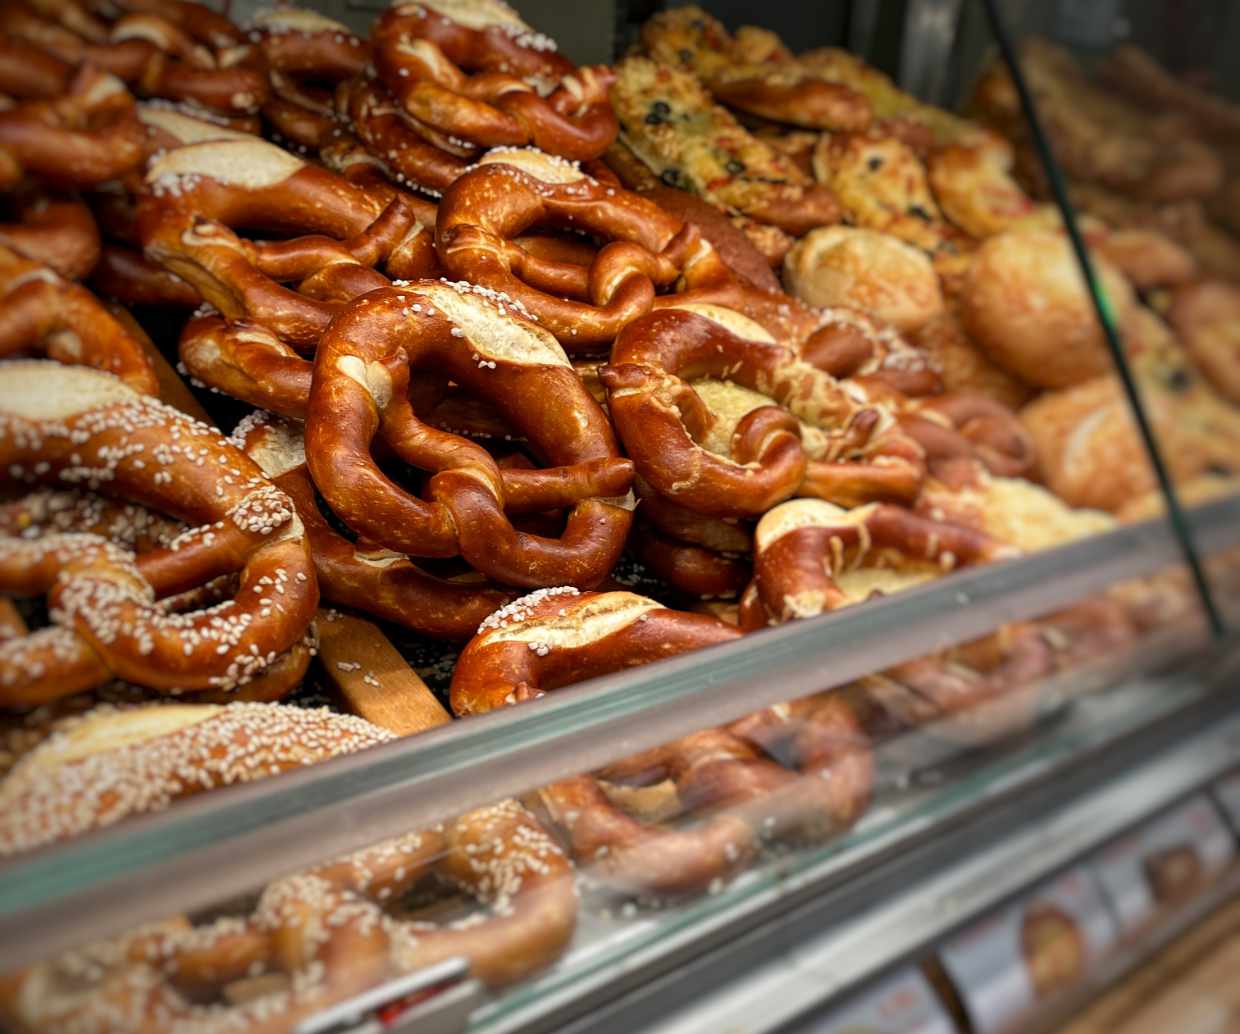 Three Pretzels You Must Try in Germany (The Ultimate Pretzel Guide)